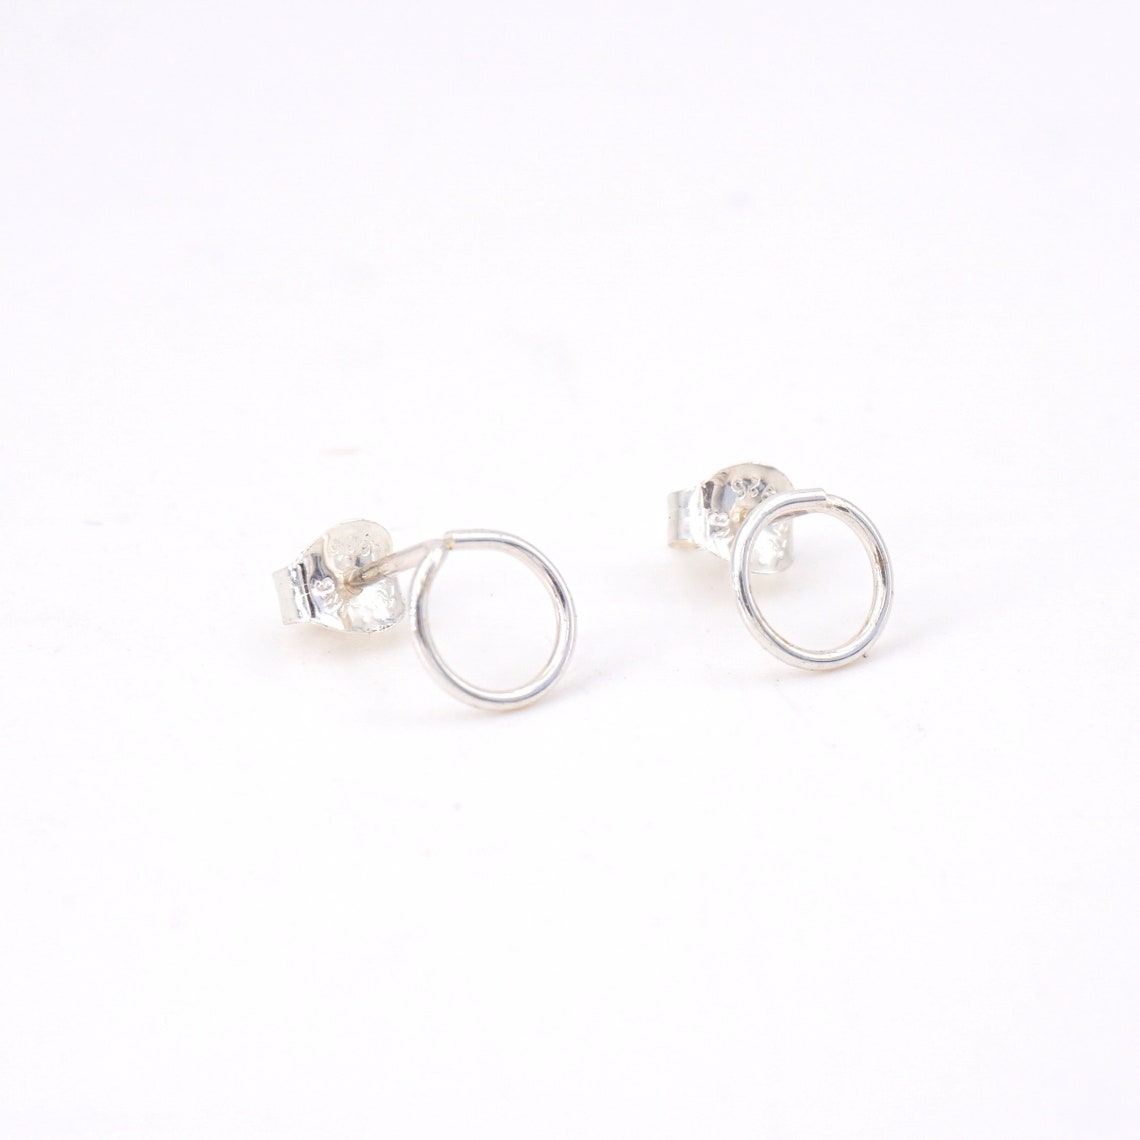 7mm Open Circle Stud Earrings: Sterling Silver & Gold-Filled 010 - Patination Design